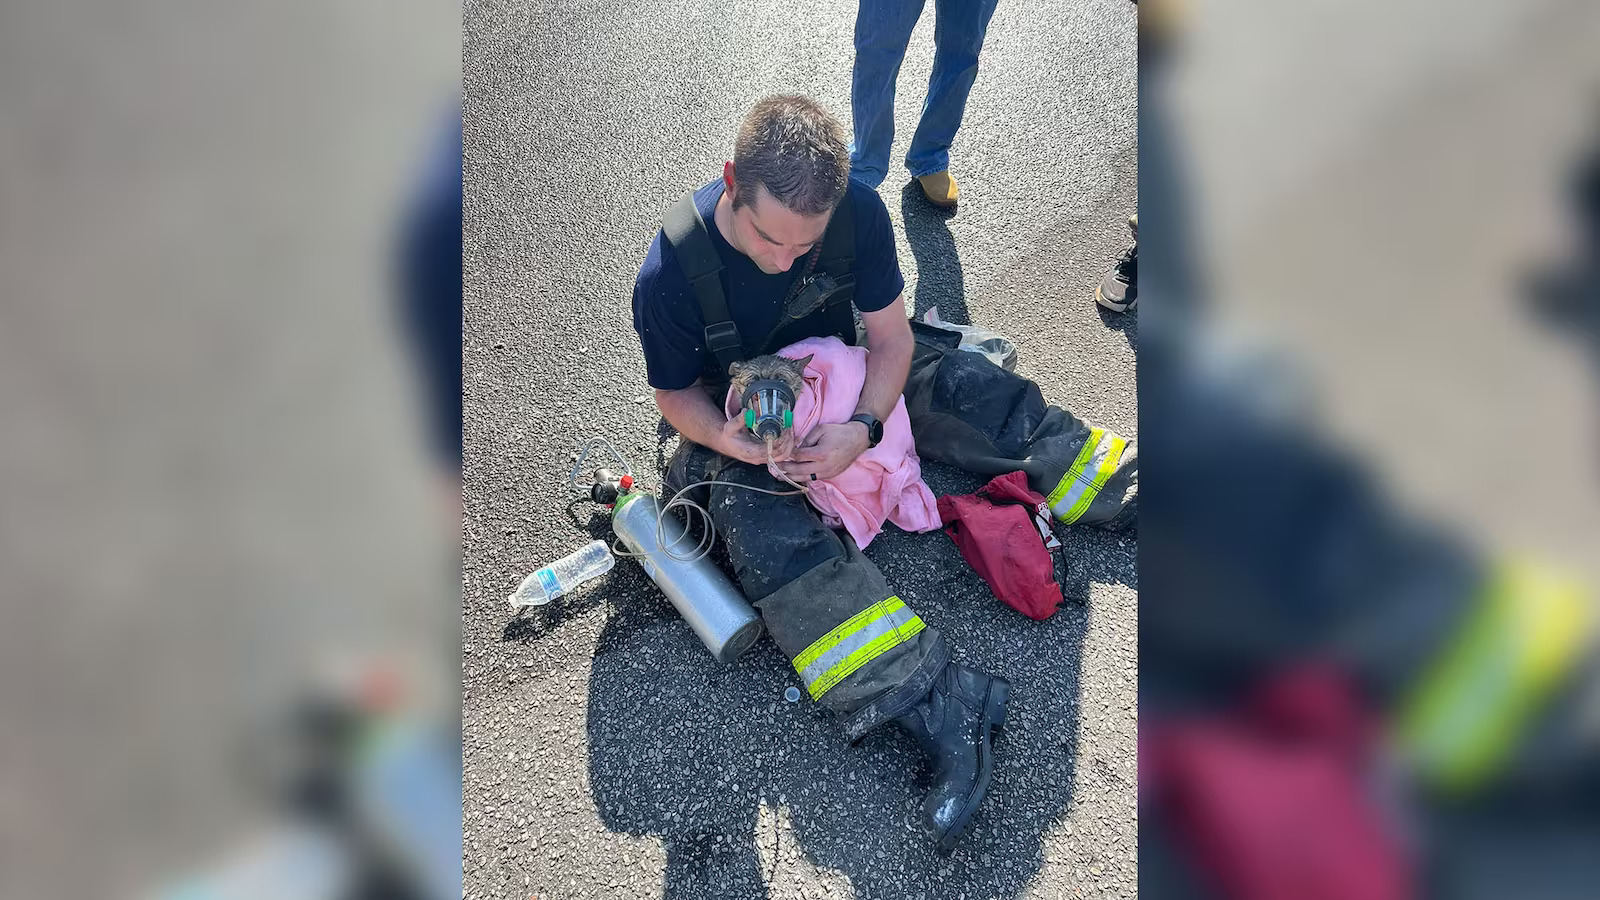 Firefighters Save Dog From Burning House